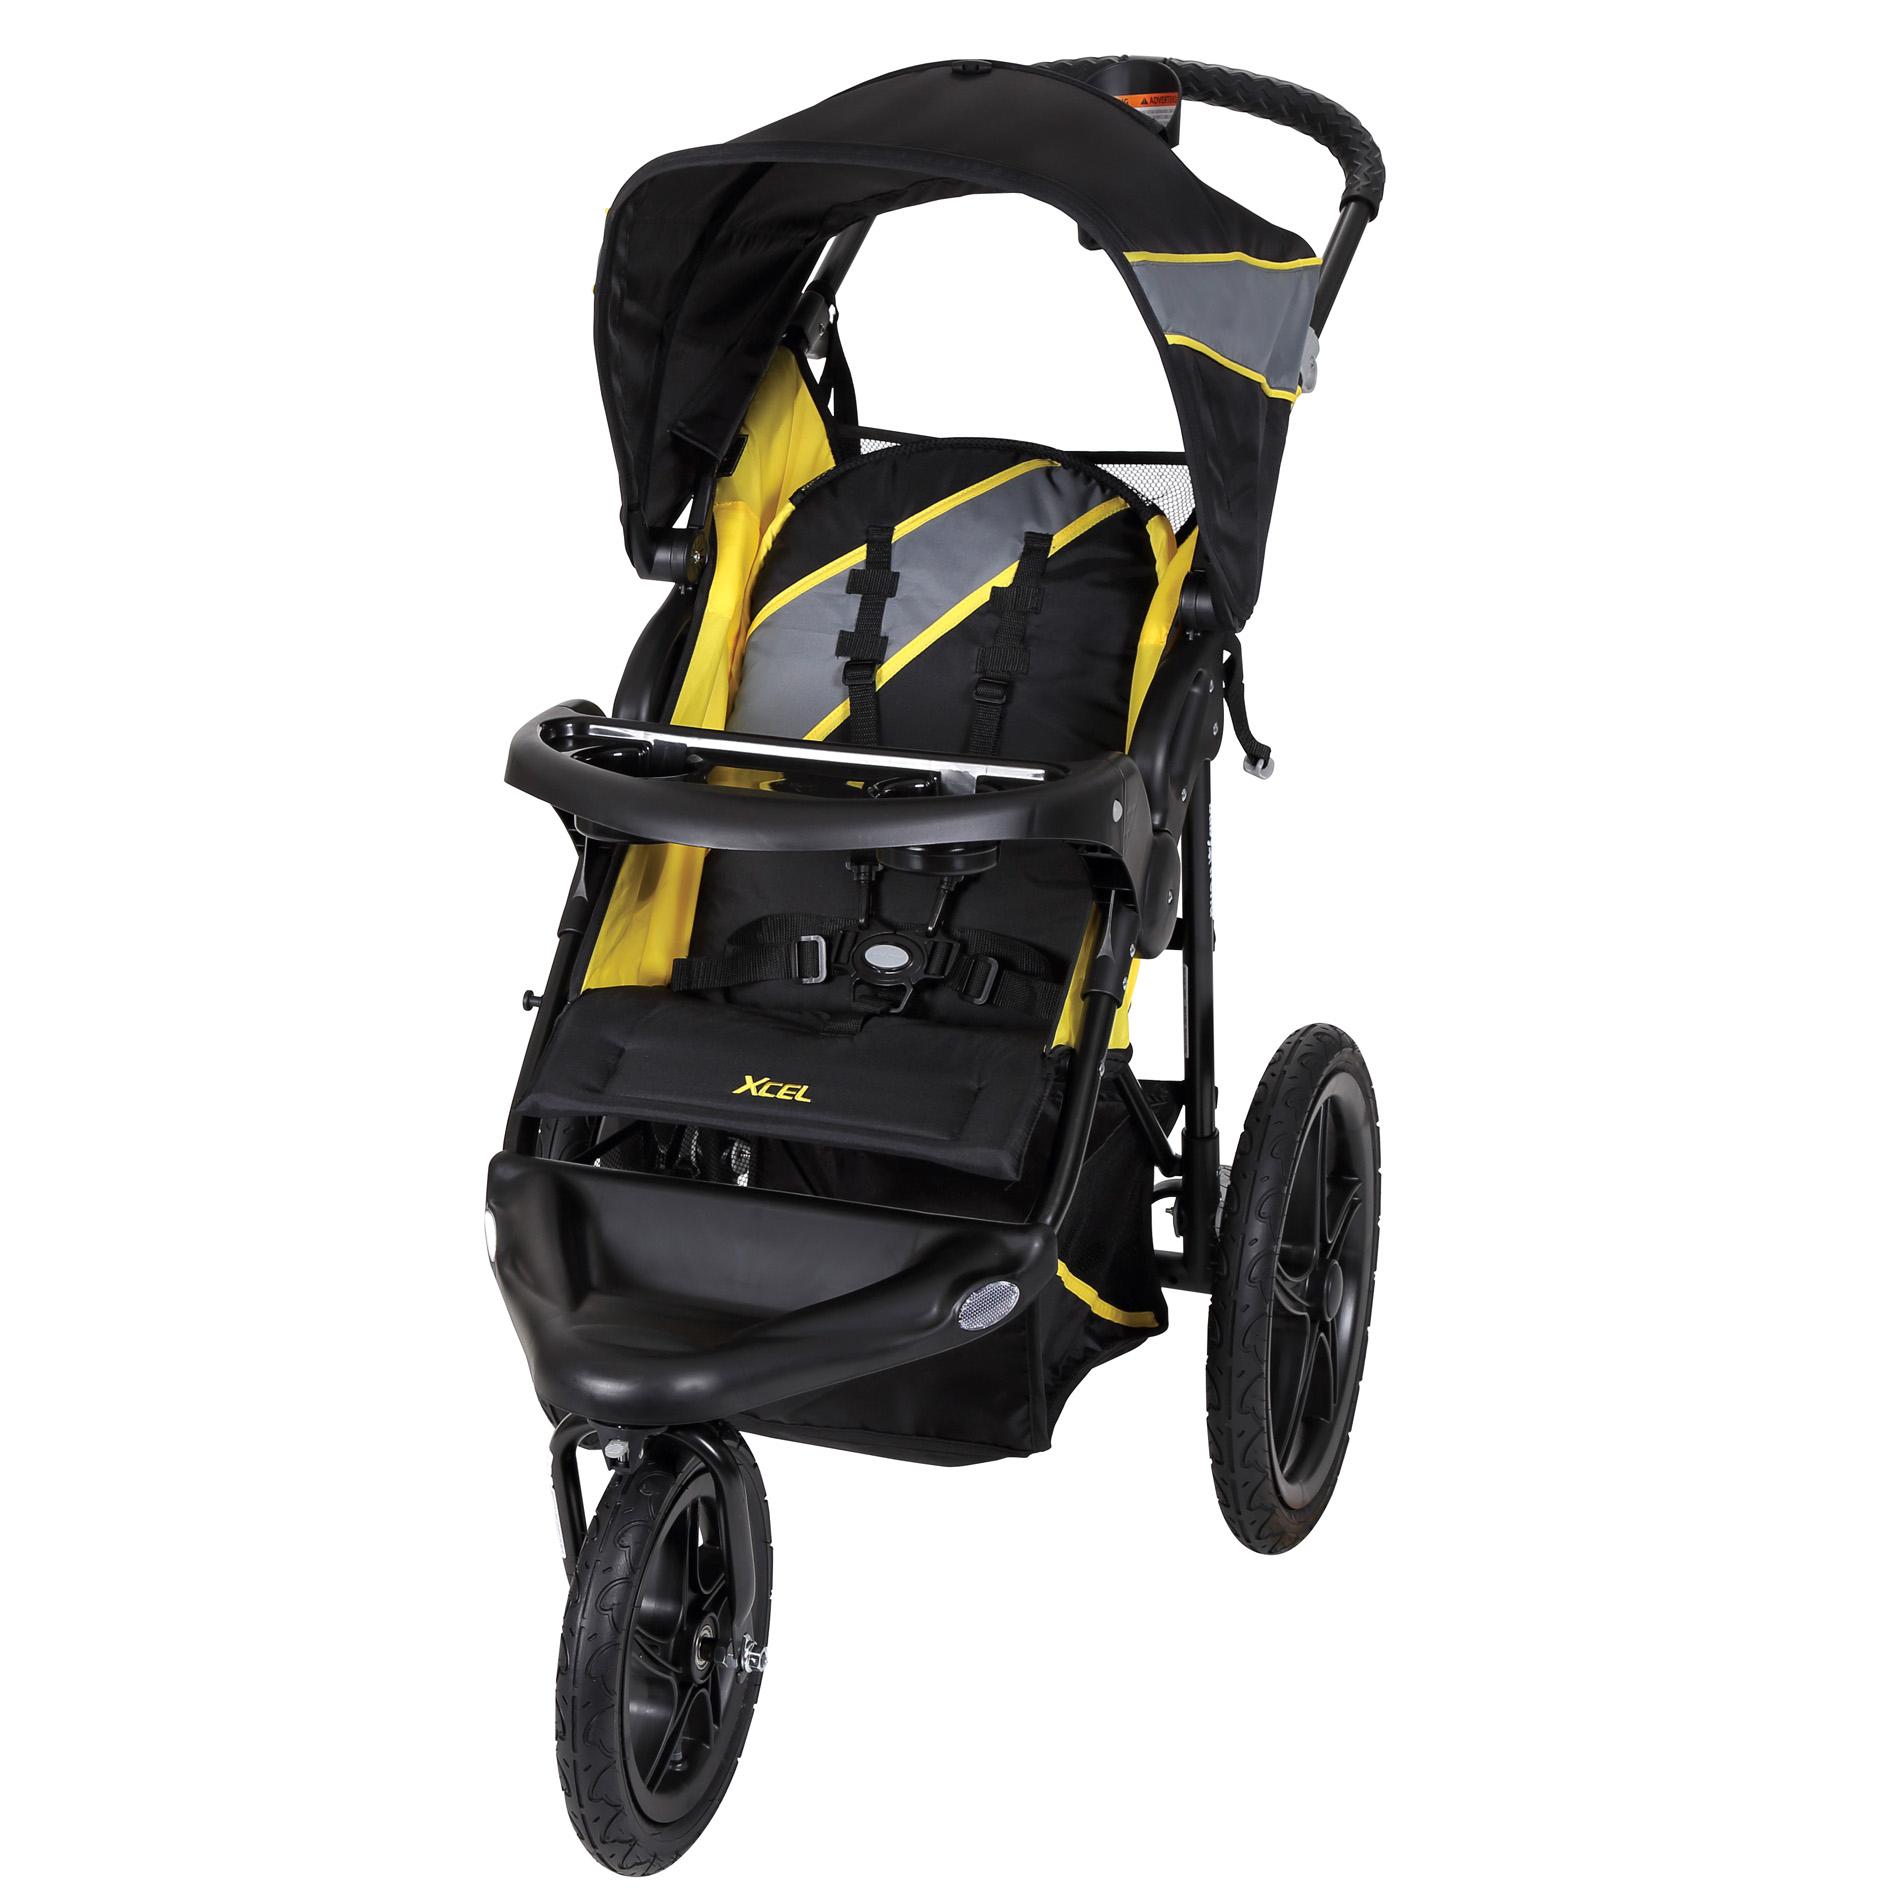 Baby Trend XCEL Jogger Stroller - Baby - Baby Car Seats & Strollers